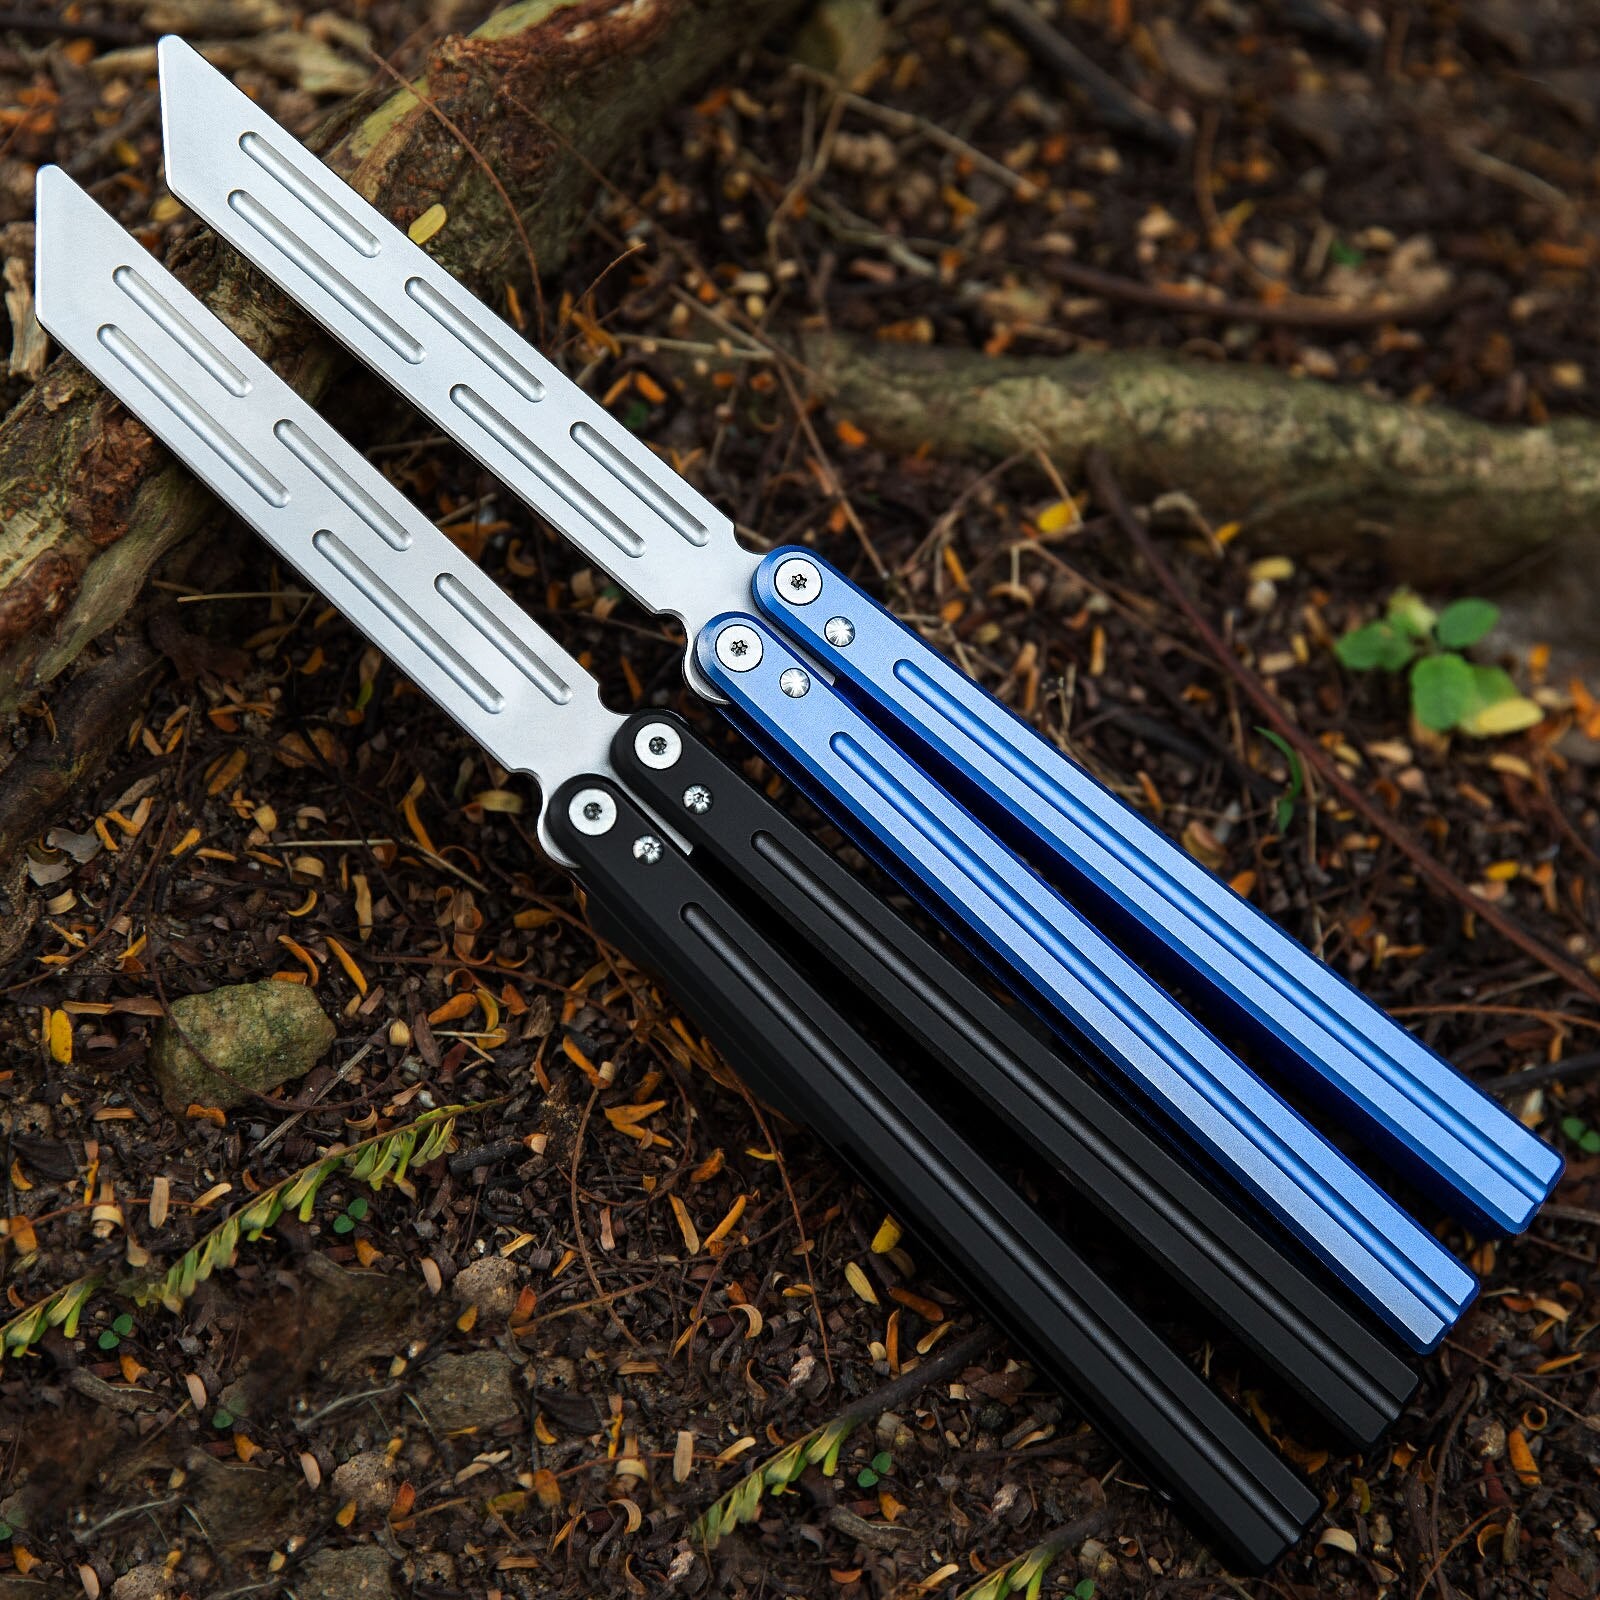 Baliplus triton v2 balisong trainer black and blue opended postitions